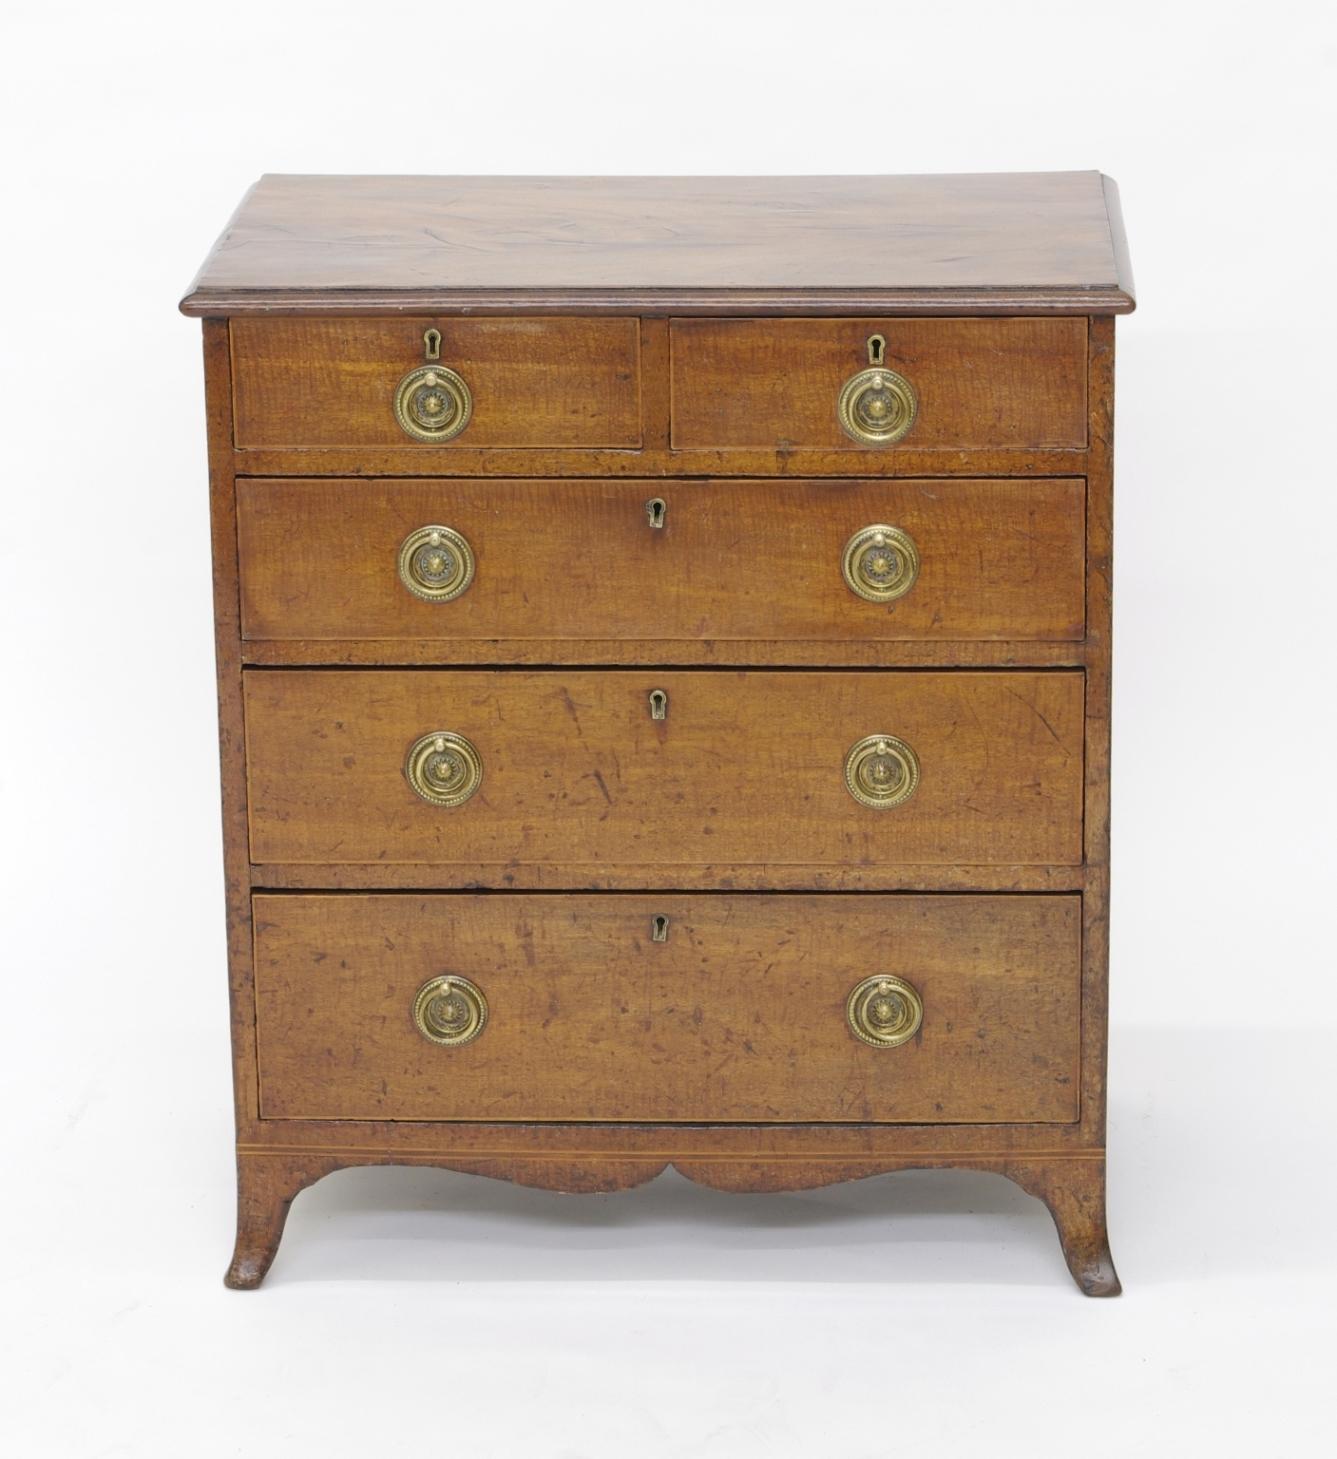 George III fiddleback mahogany small chest of drawers, the rectangular top with well figured veneer and molded edge over two short drawers and three long drawers, each with boxwood stringing and the original ring-pull hardware; the splayed legs